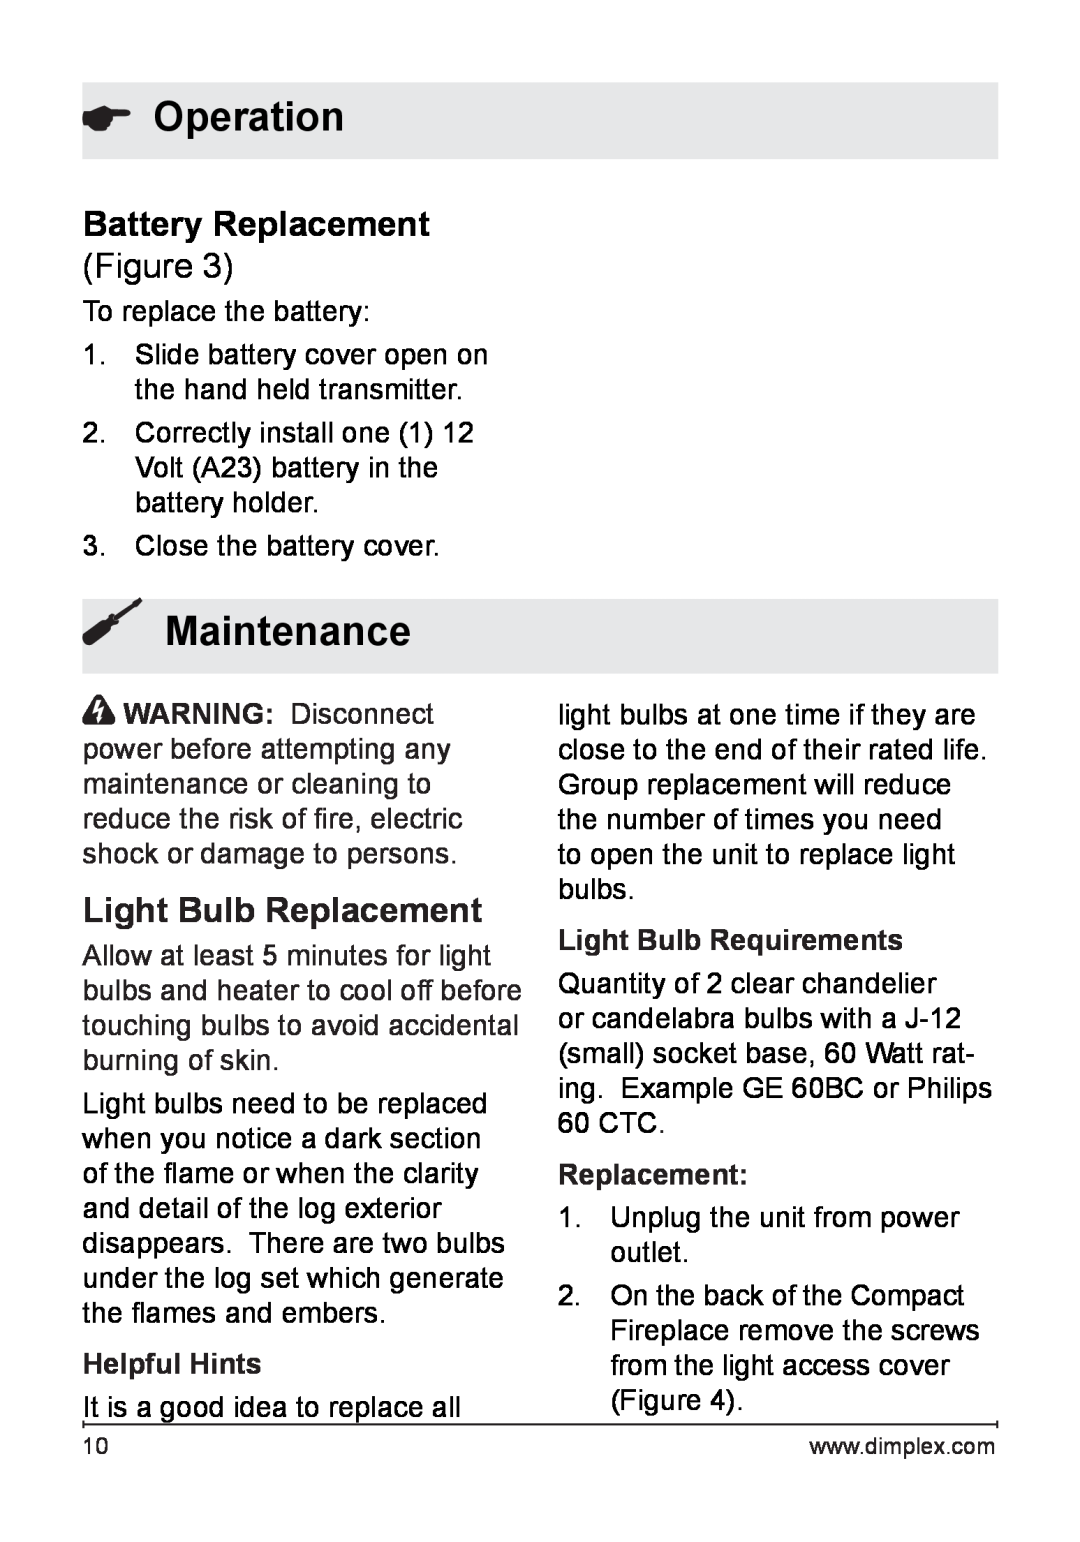 Dimplex 7207250100R05 owner manual Maintenance, Battery Replacement, Light Bulb Replacement, Operation, Helpful Hints 